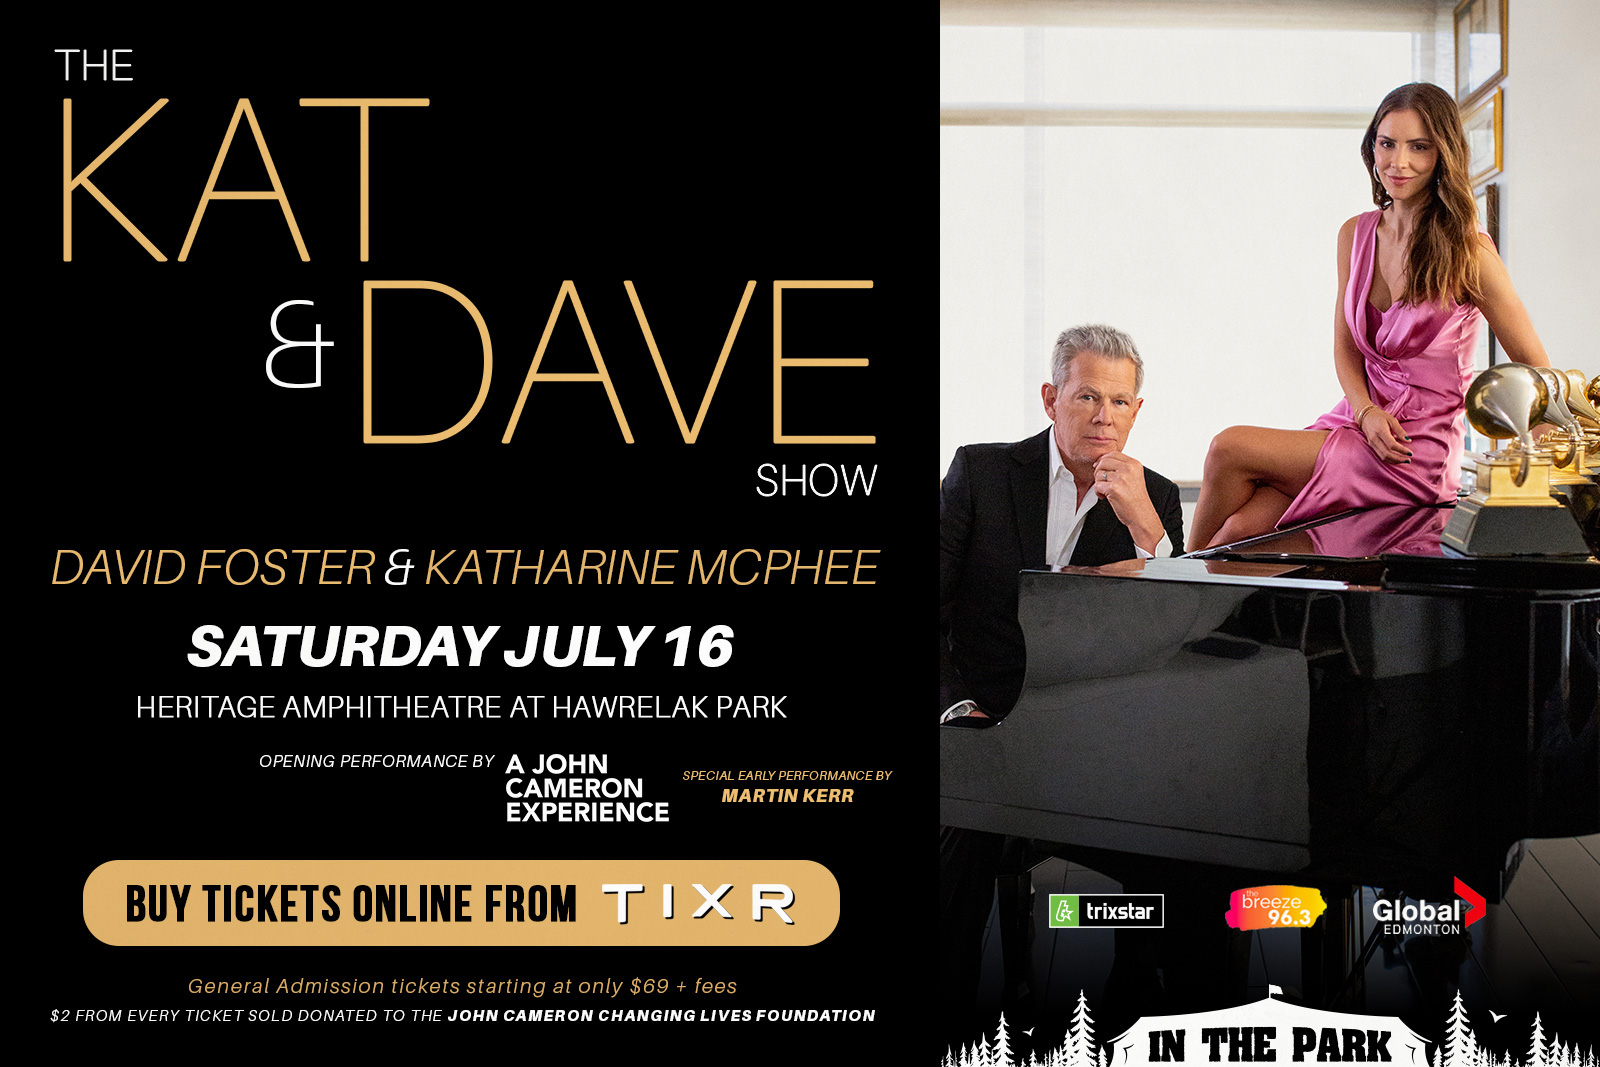 Kat & Dave In The Park - David Foster and Katharine McPhee at Hawrelak Park with an opening performance by A John Cameron Experience - Saturday, July 16 in Edmonton, Alberta